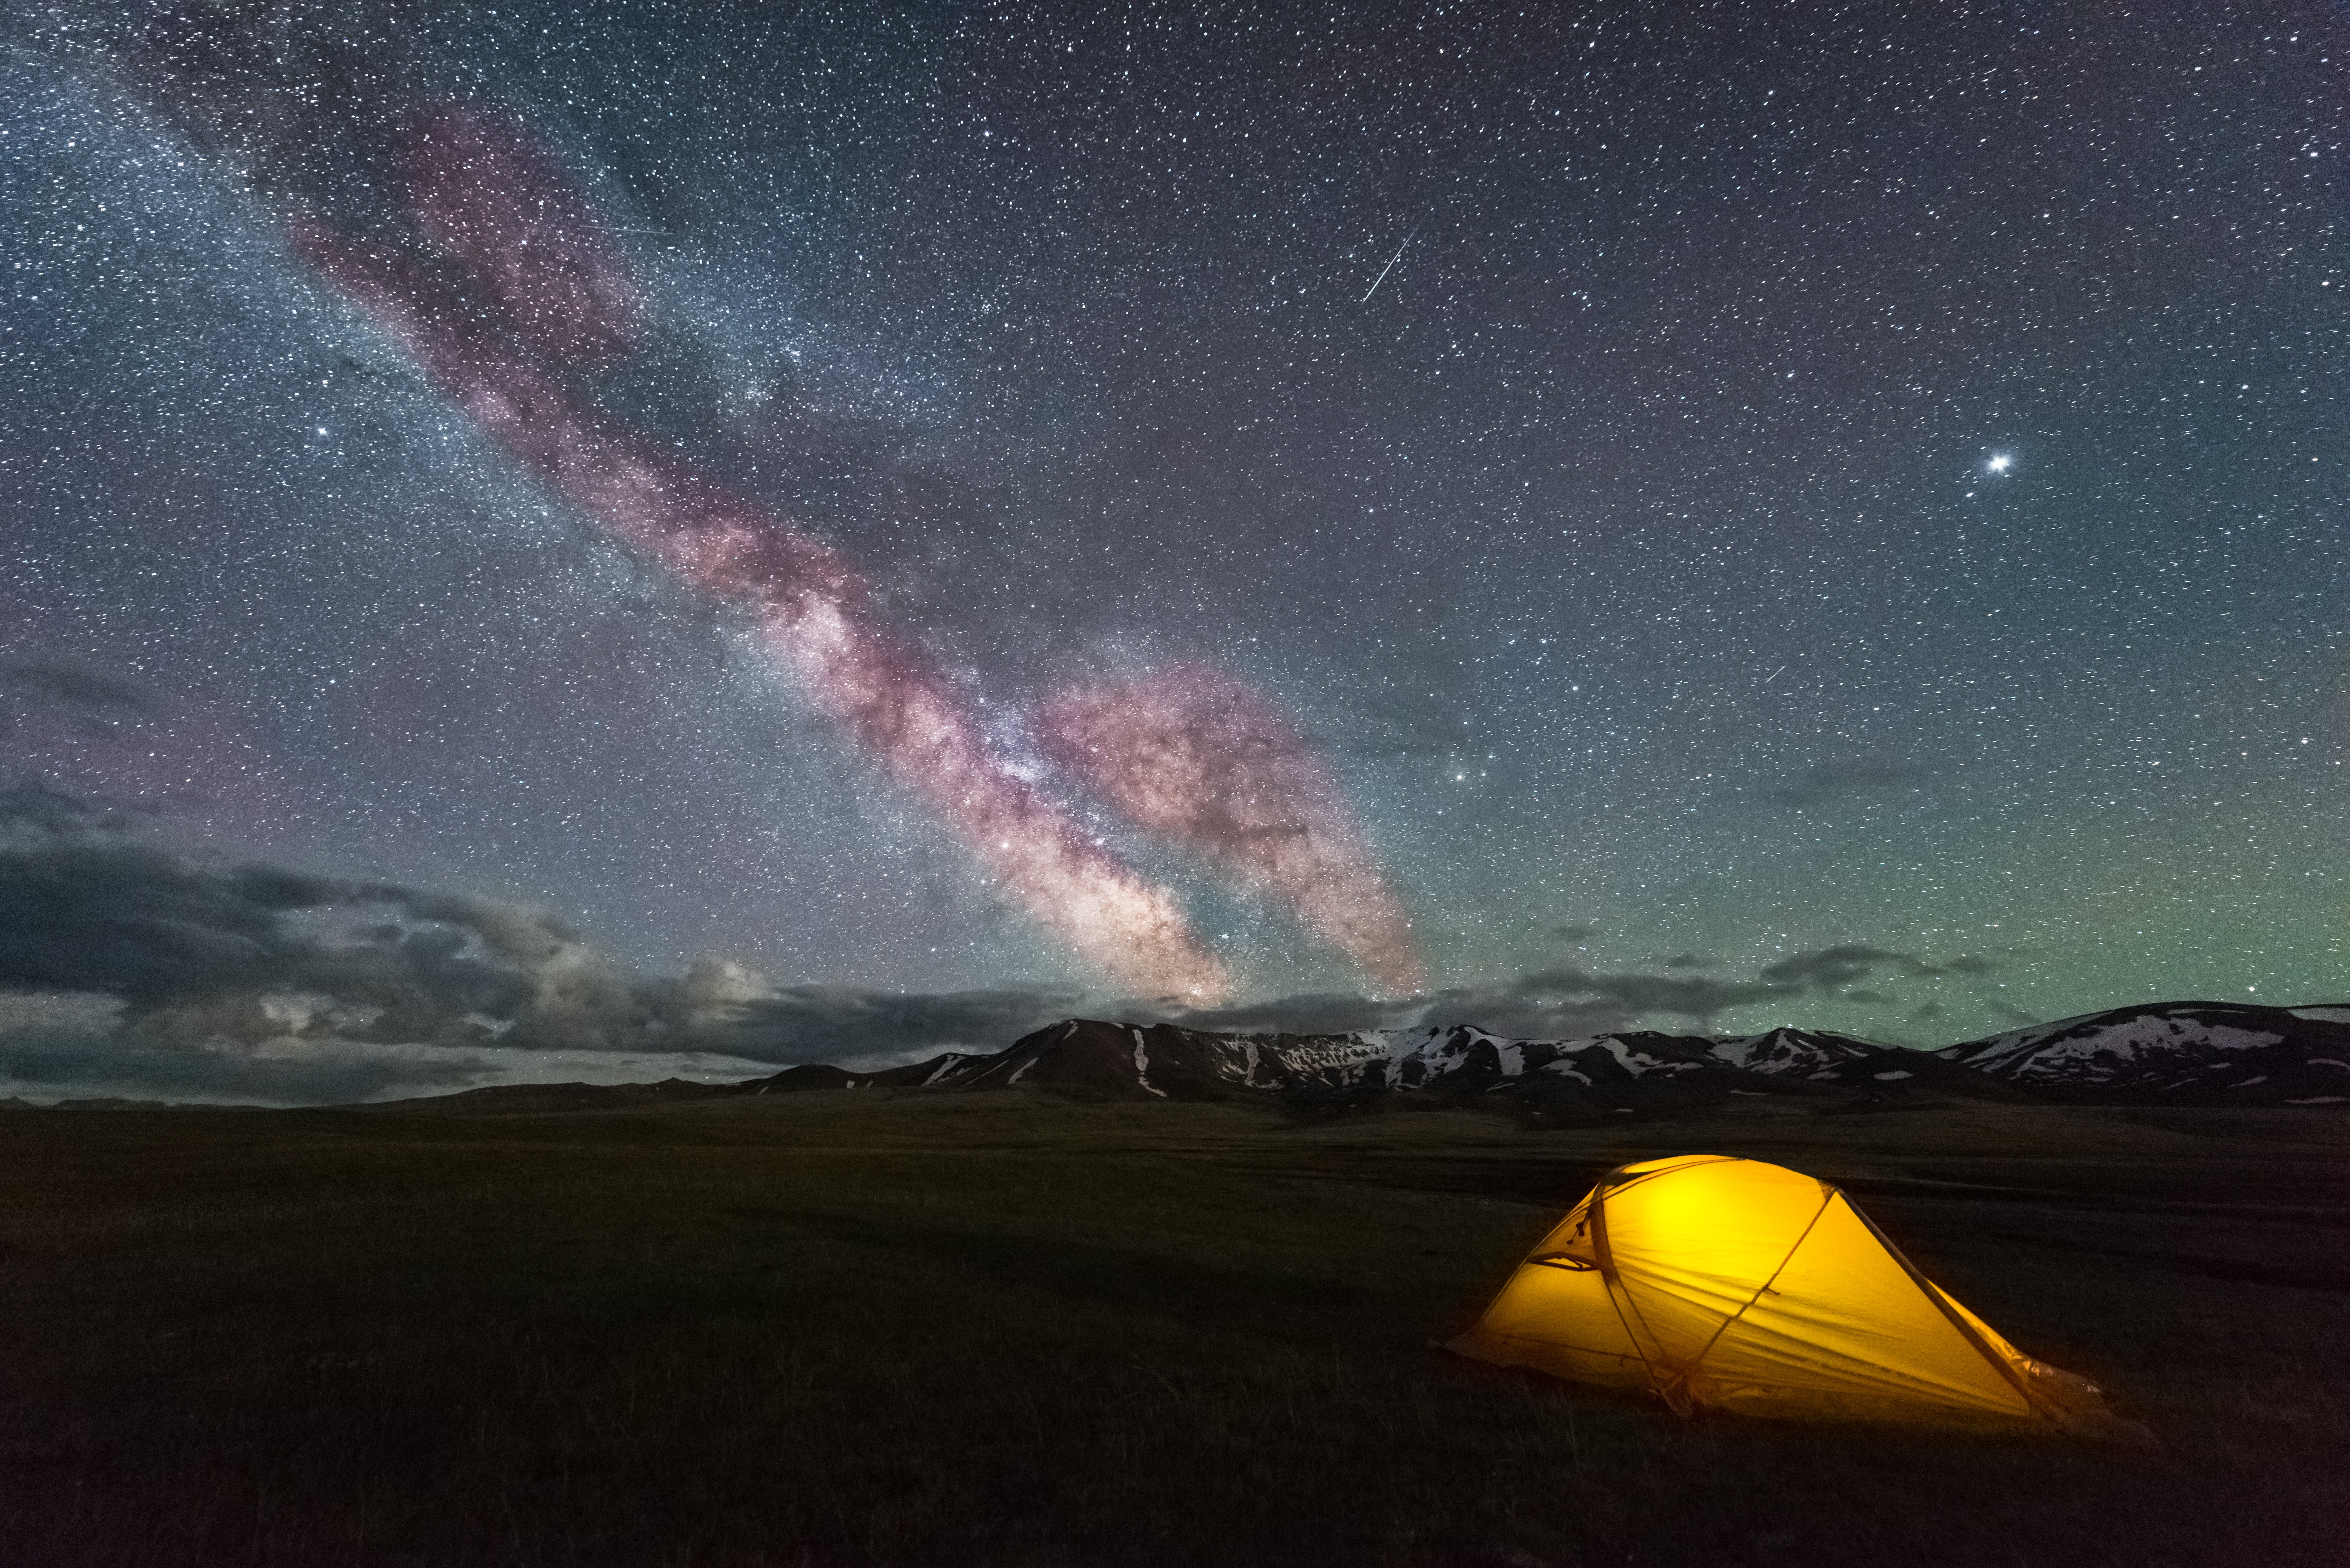 milky-way-on-starry-sky-and-yellow-tent-4VZLNFQ